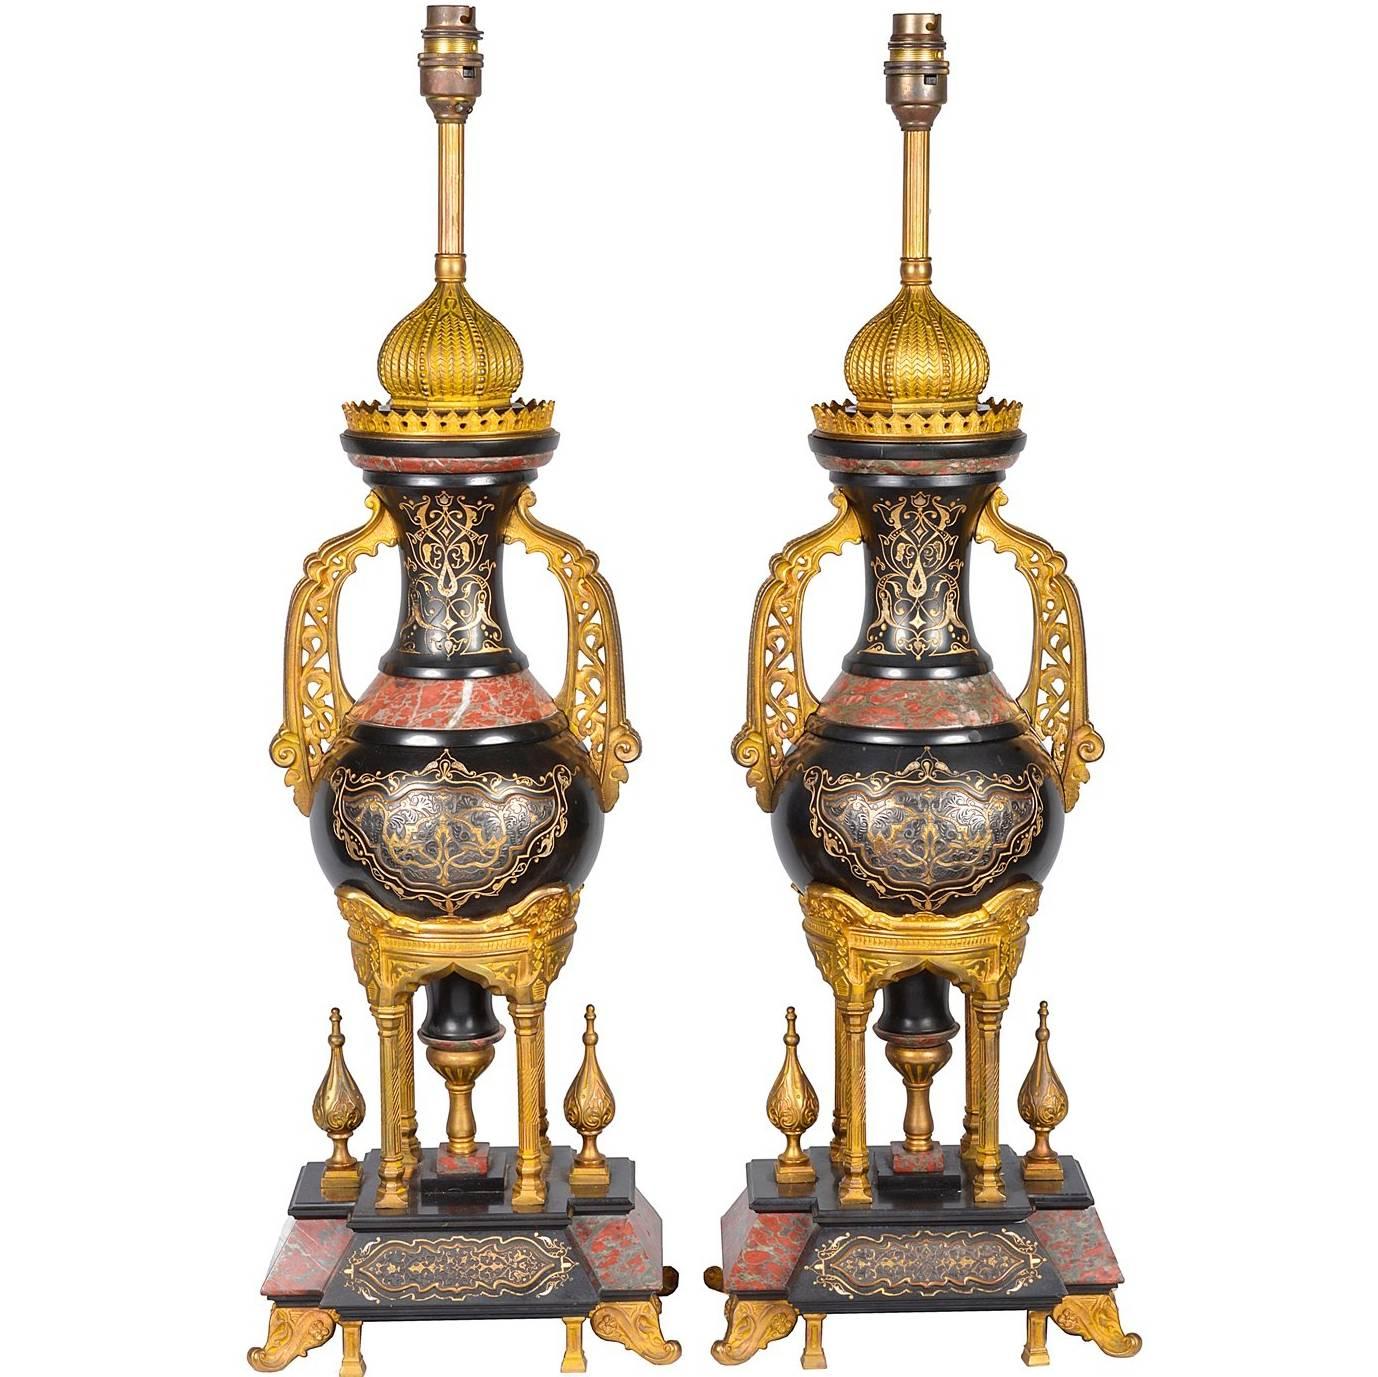 Islamic Influenced 19th Century Lamps For Sale